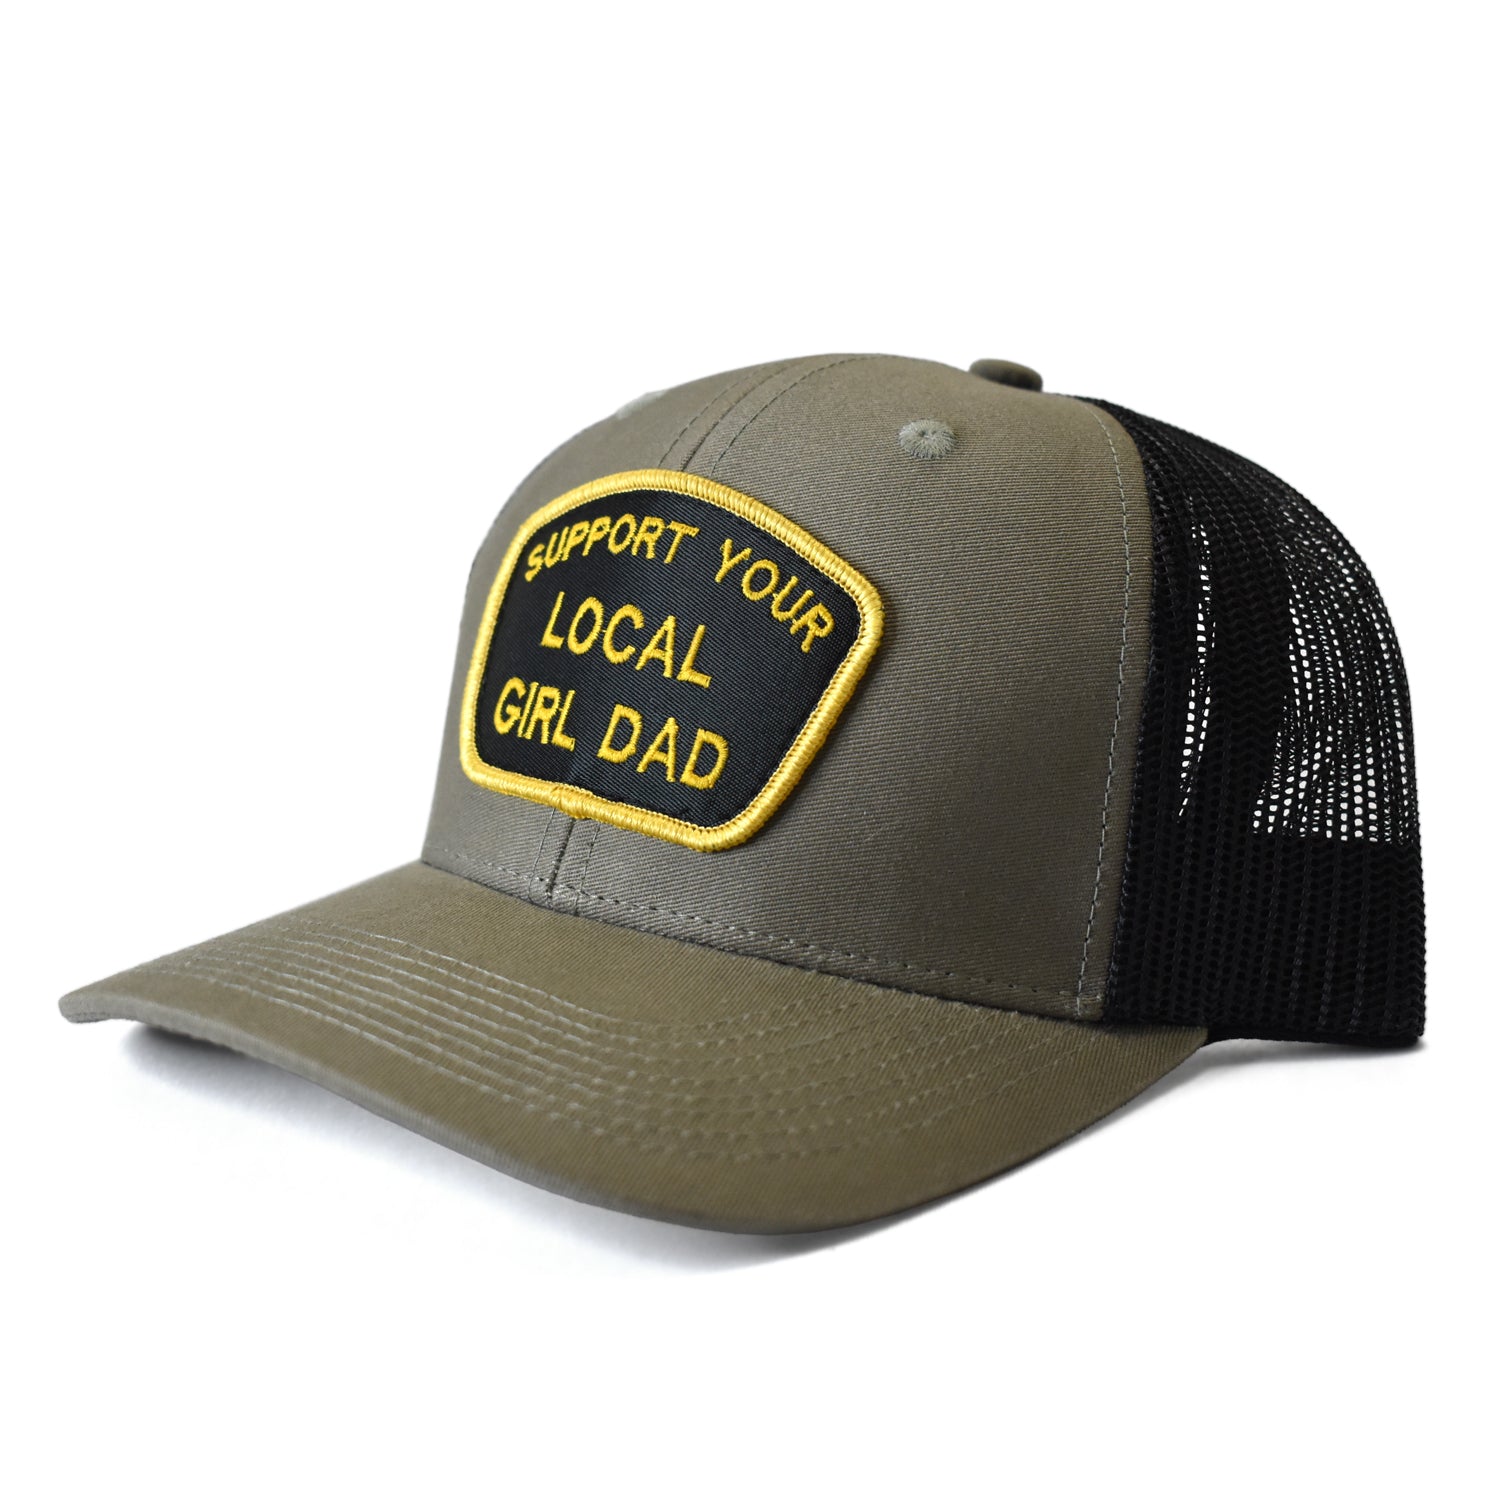 Support Your Local Girl Dad Patch Hat